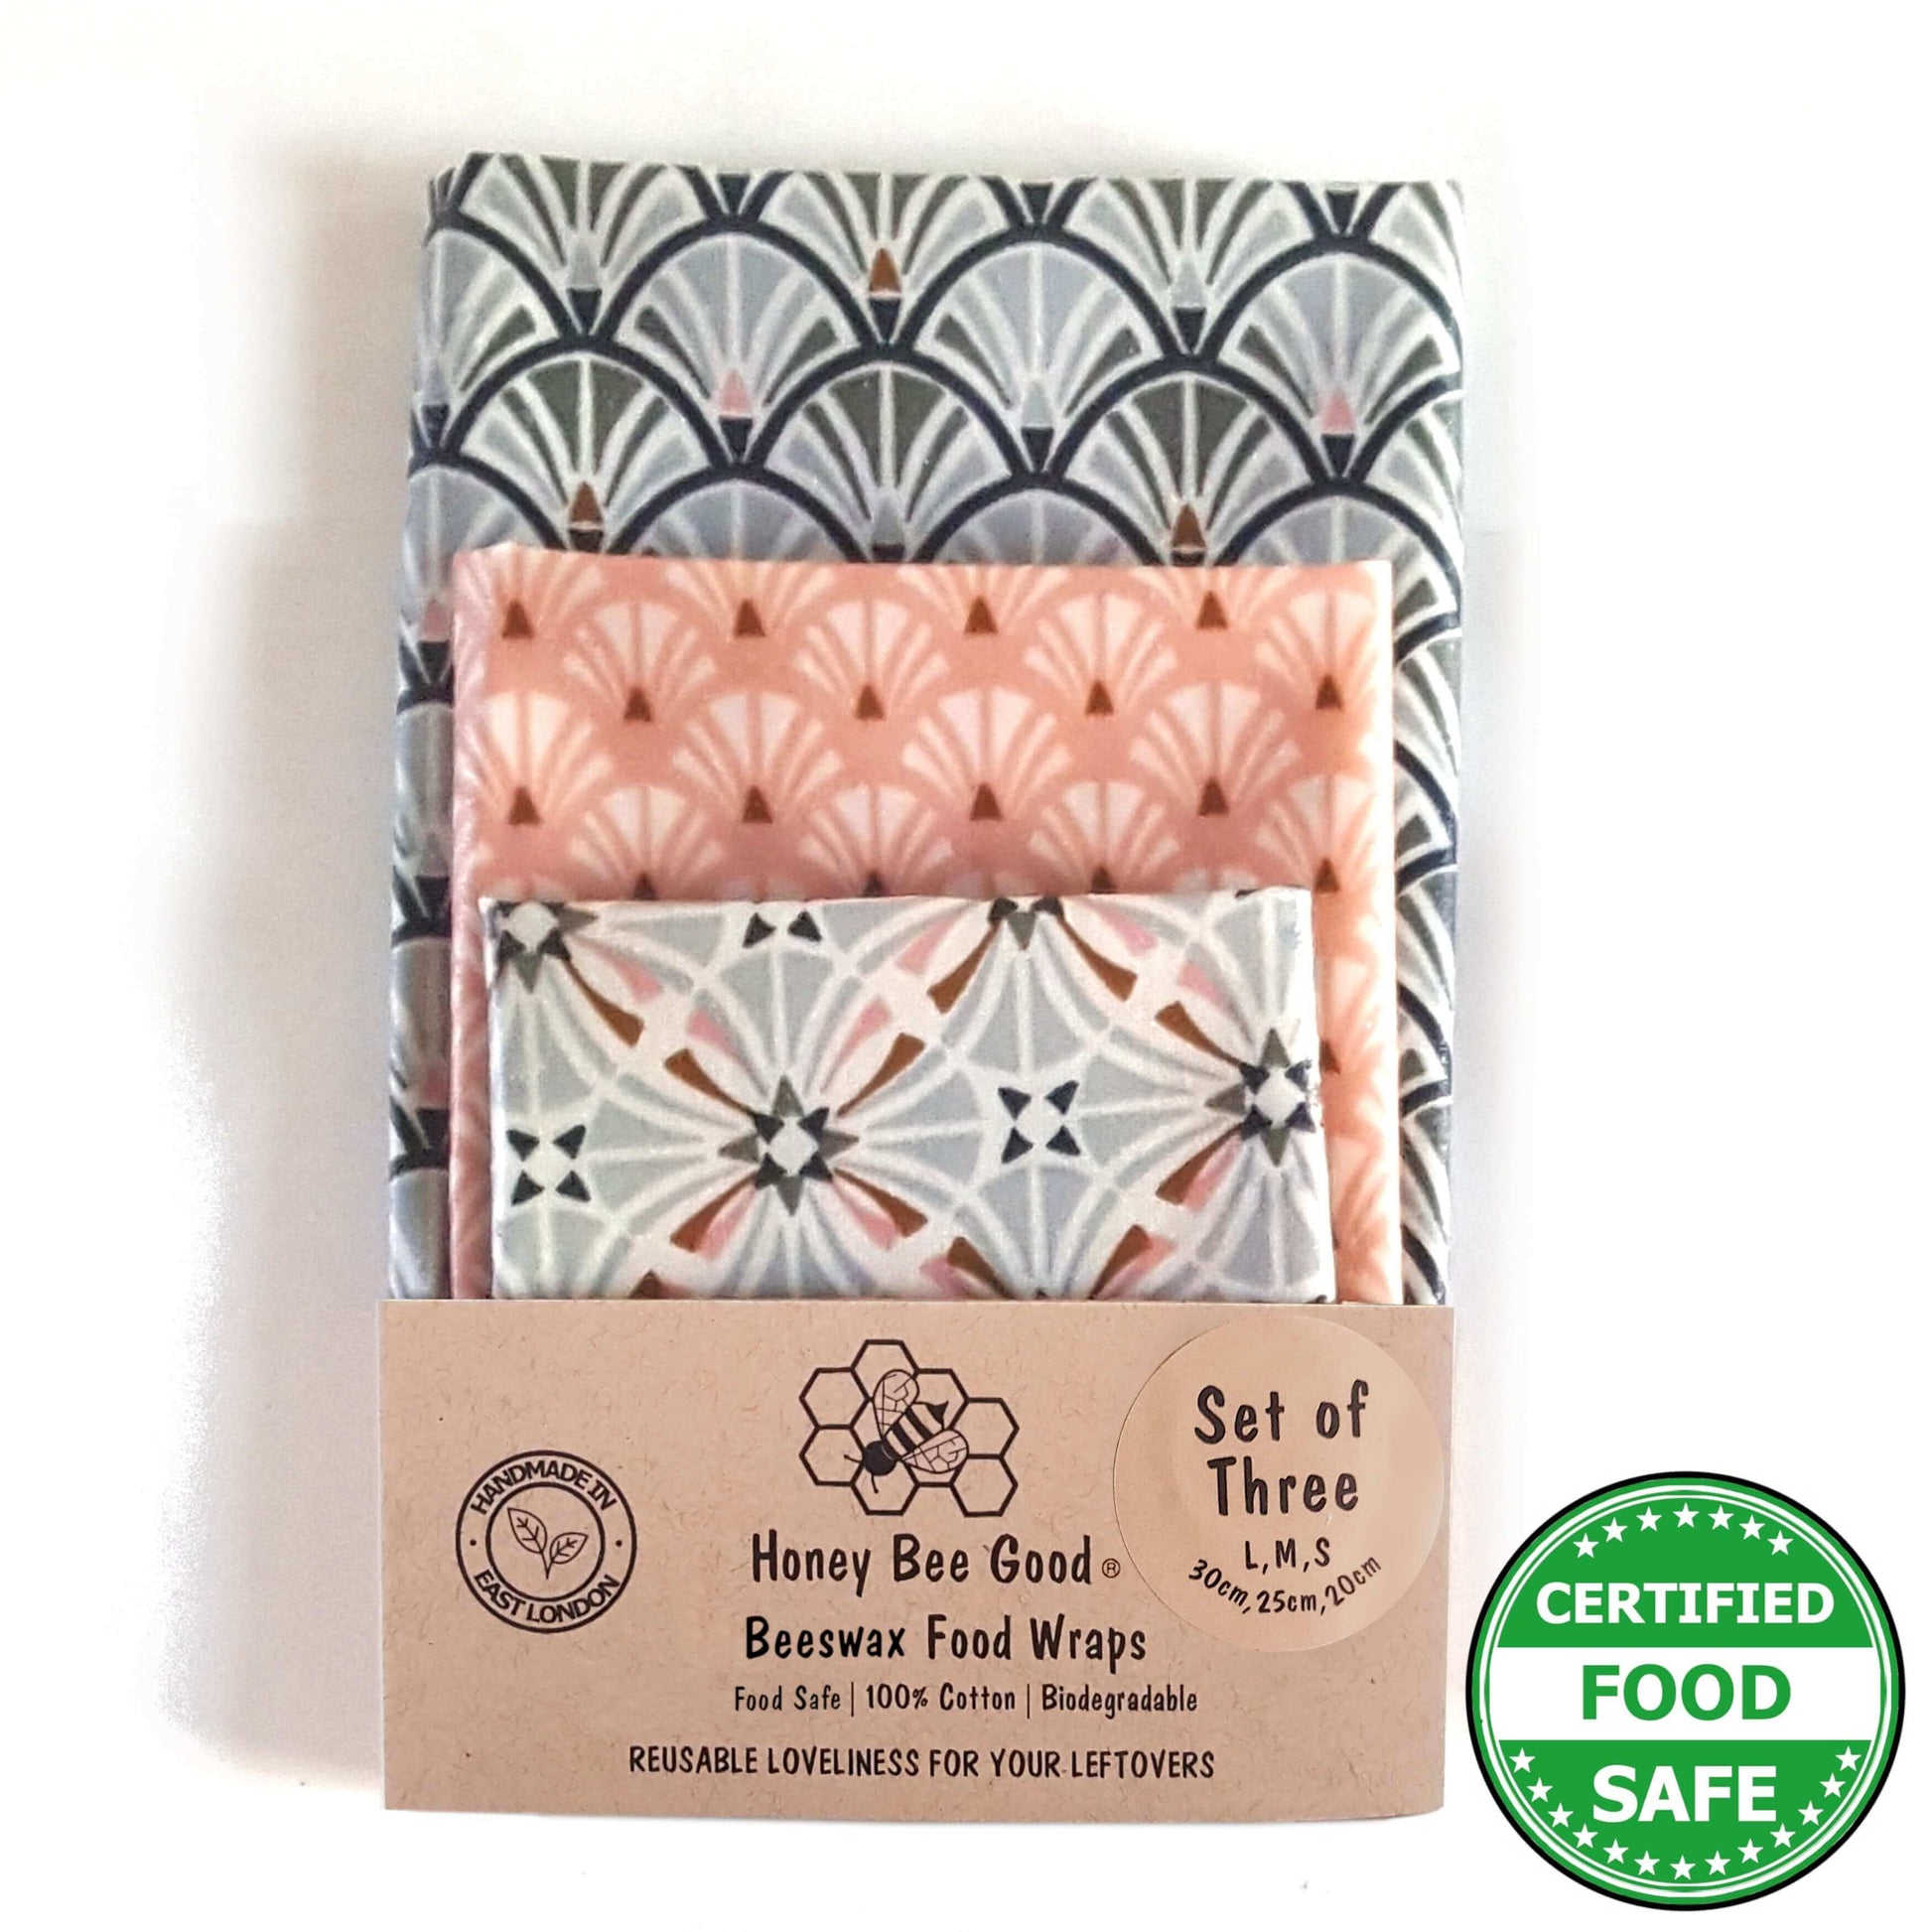 Reusable Beeswax Food Wraps 100% Hand Made in the UK by Honey Bee Good shown in Set of 3 Heritage Blush pattern